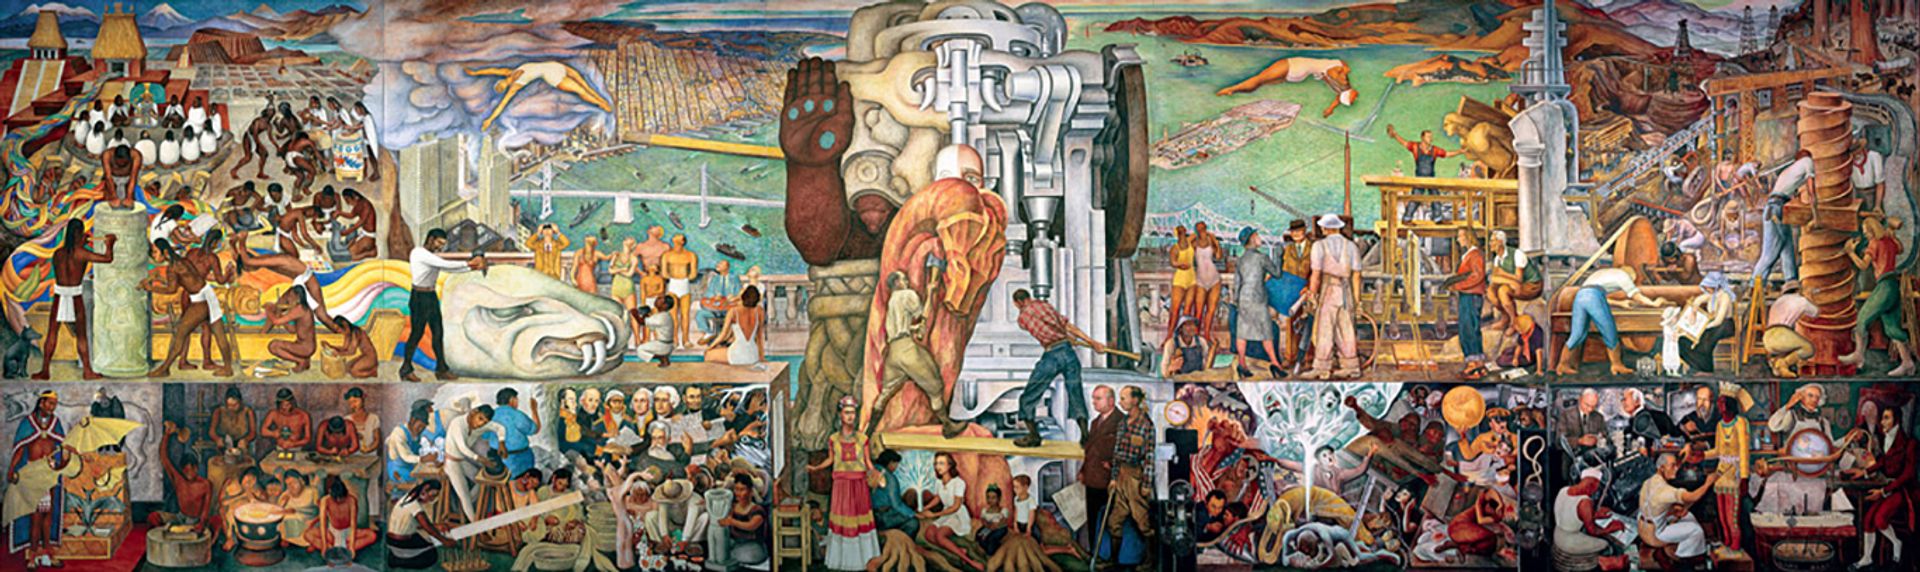 Diego Rivera, The Marriage of the Artistic Expression of the North and of the South on This Continent (also known as Pan American Unity), 1940 © Banco de México Diego Rivera and Frida Kahlo Museums Trust, Mexico D.F. / Artist Rights Society (ARS), New York; image: courtesy of City College of San Francisco